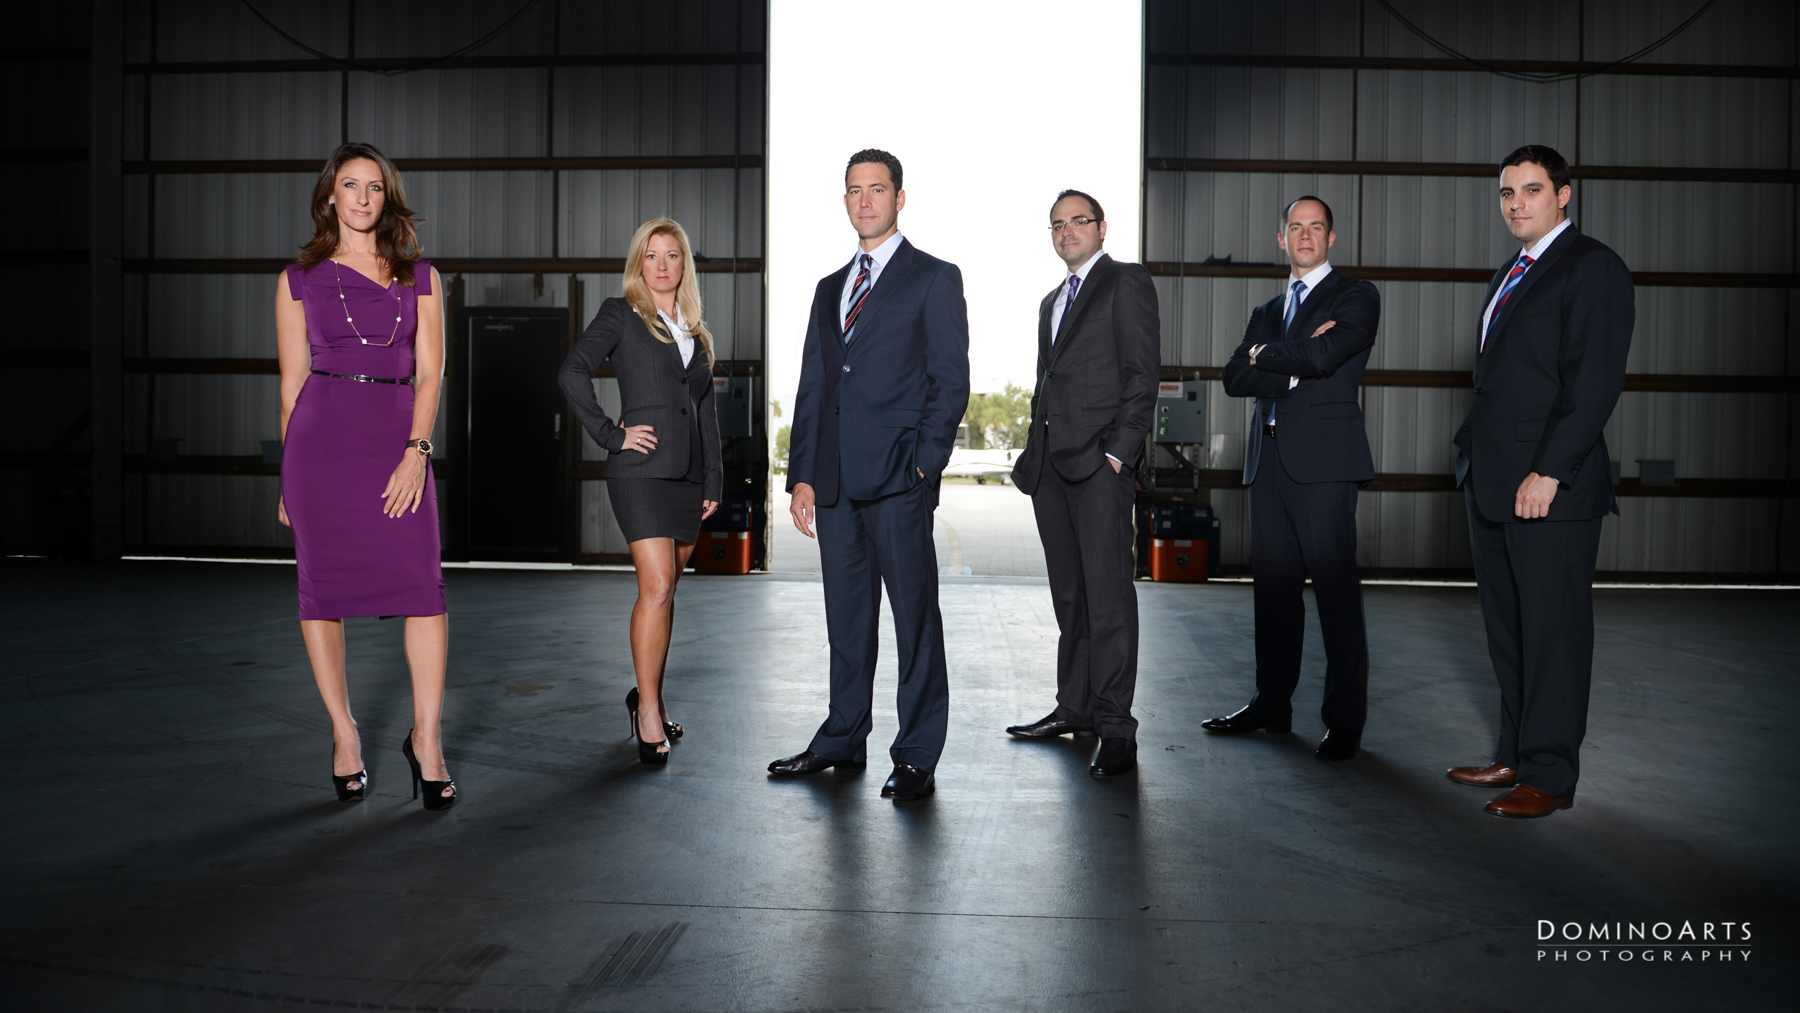 Professional Law Firm Photography / South Florida